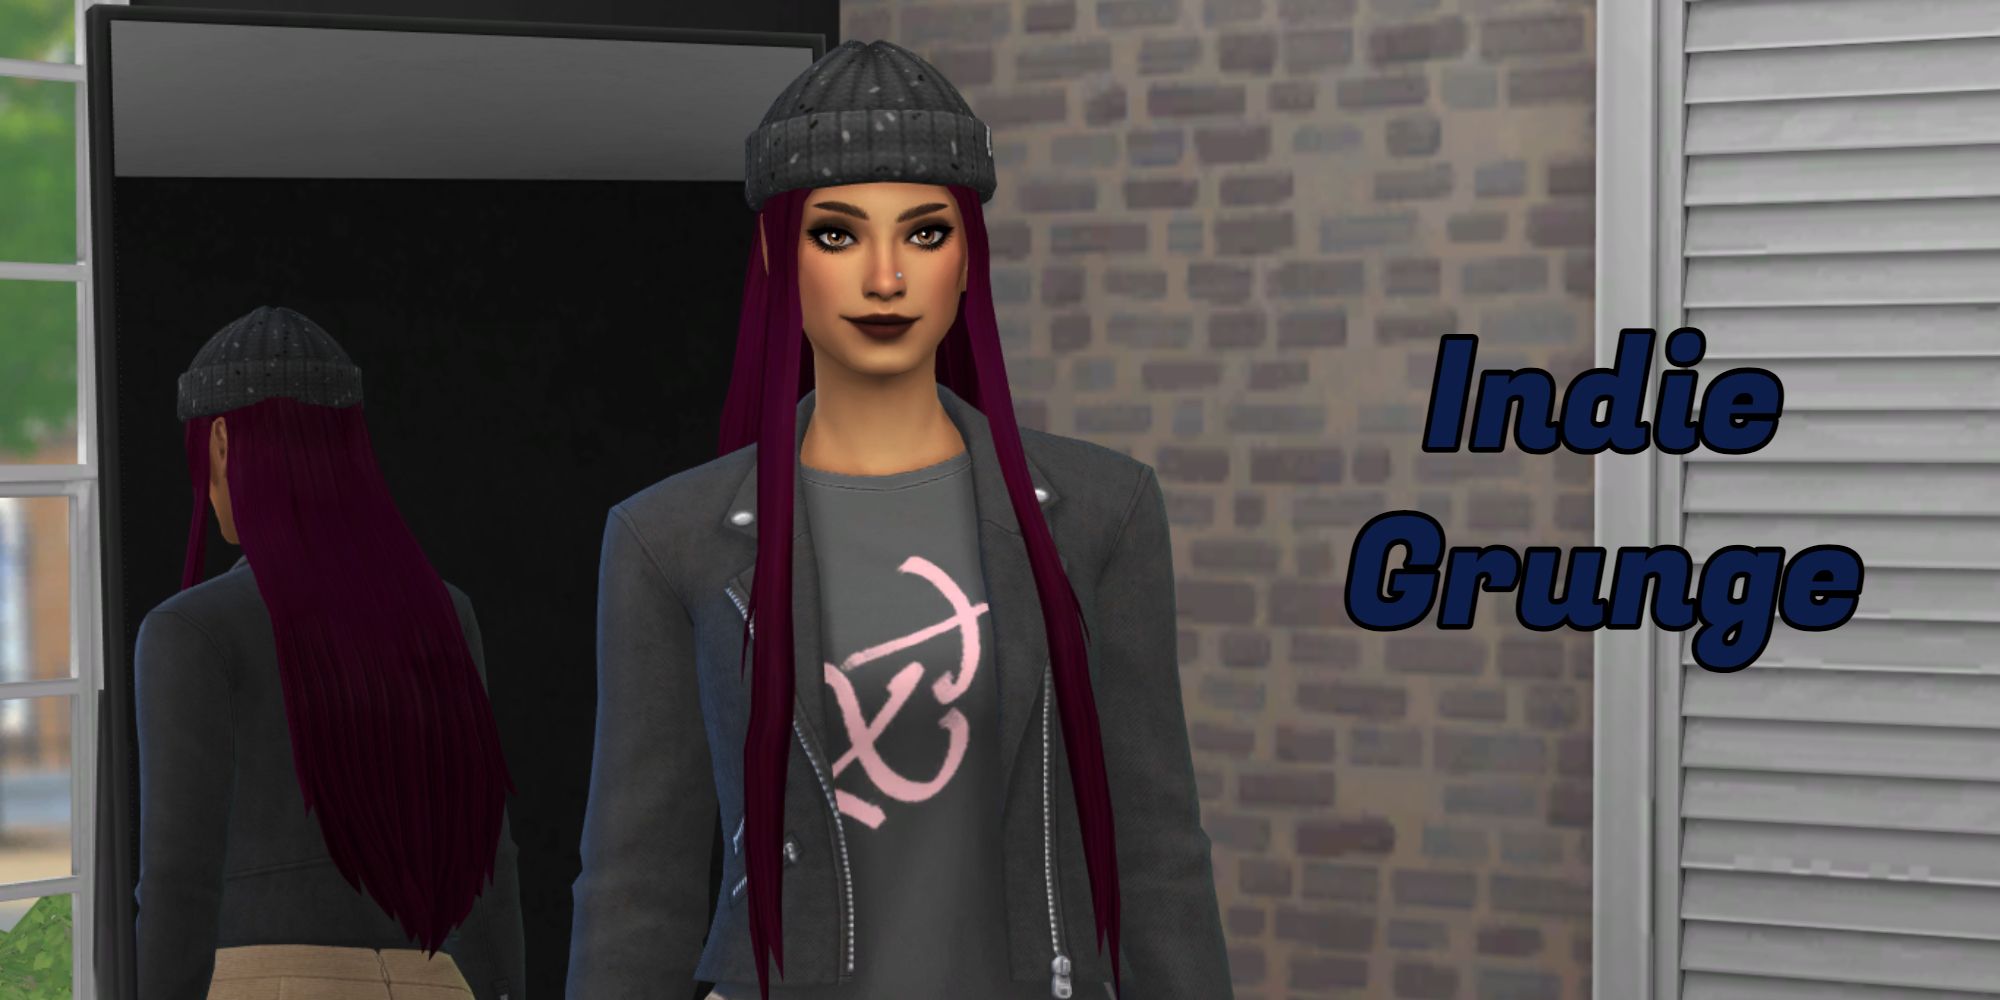 A Sim with long purple hair and black clothing represents the Indie Grunge generation